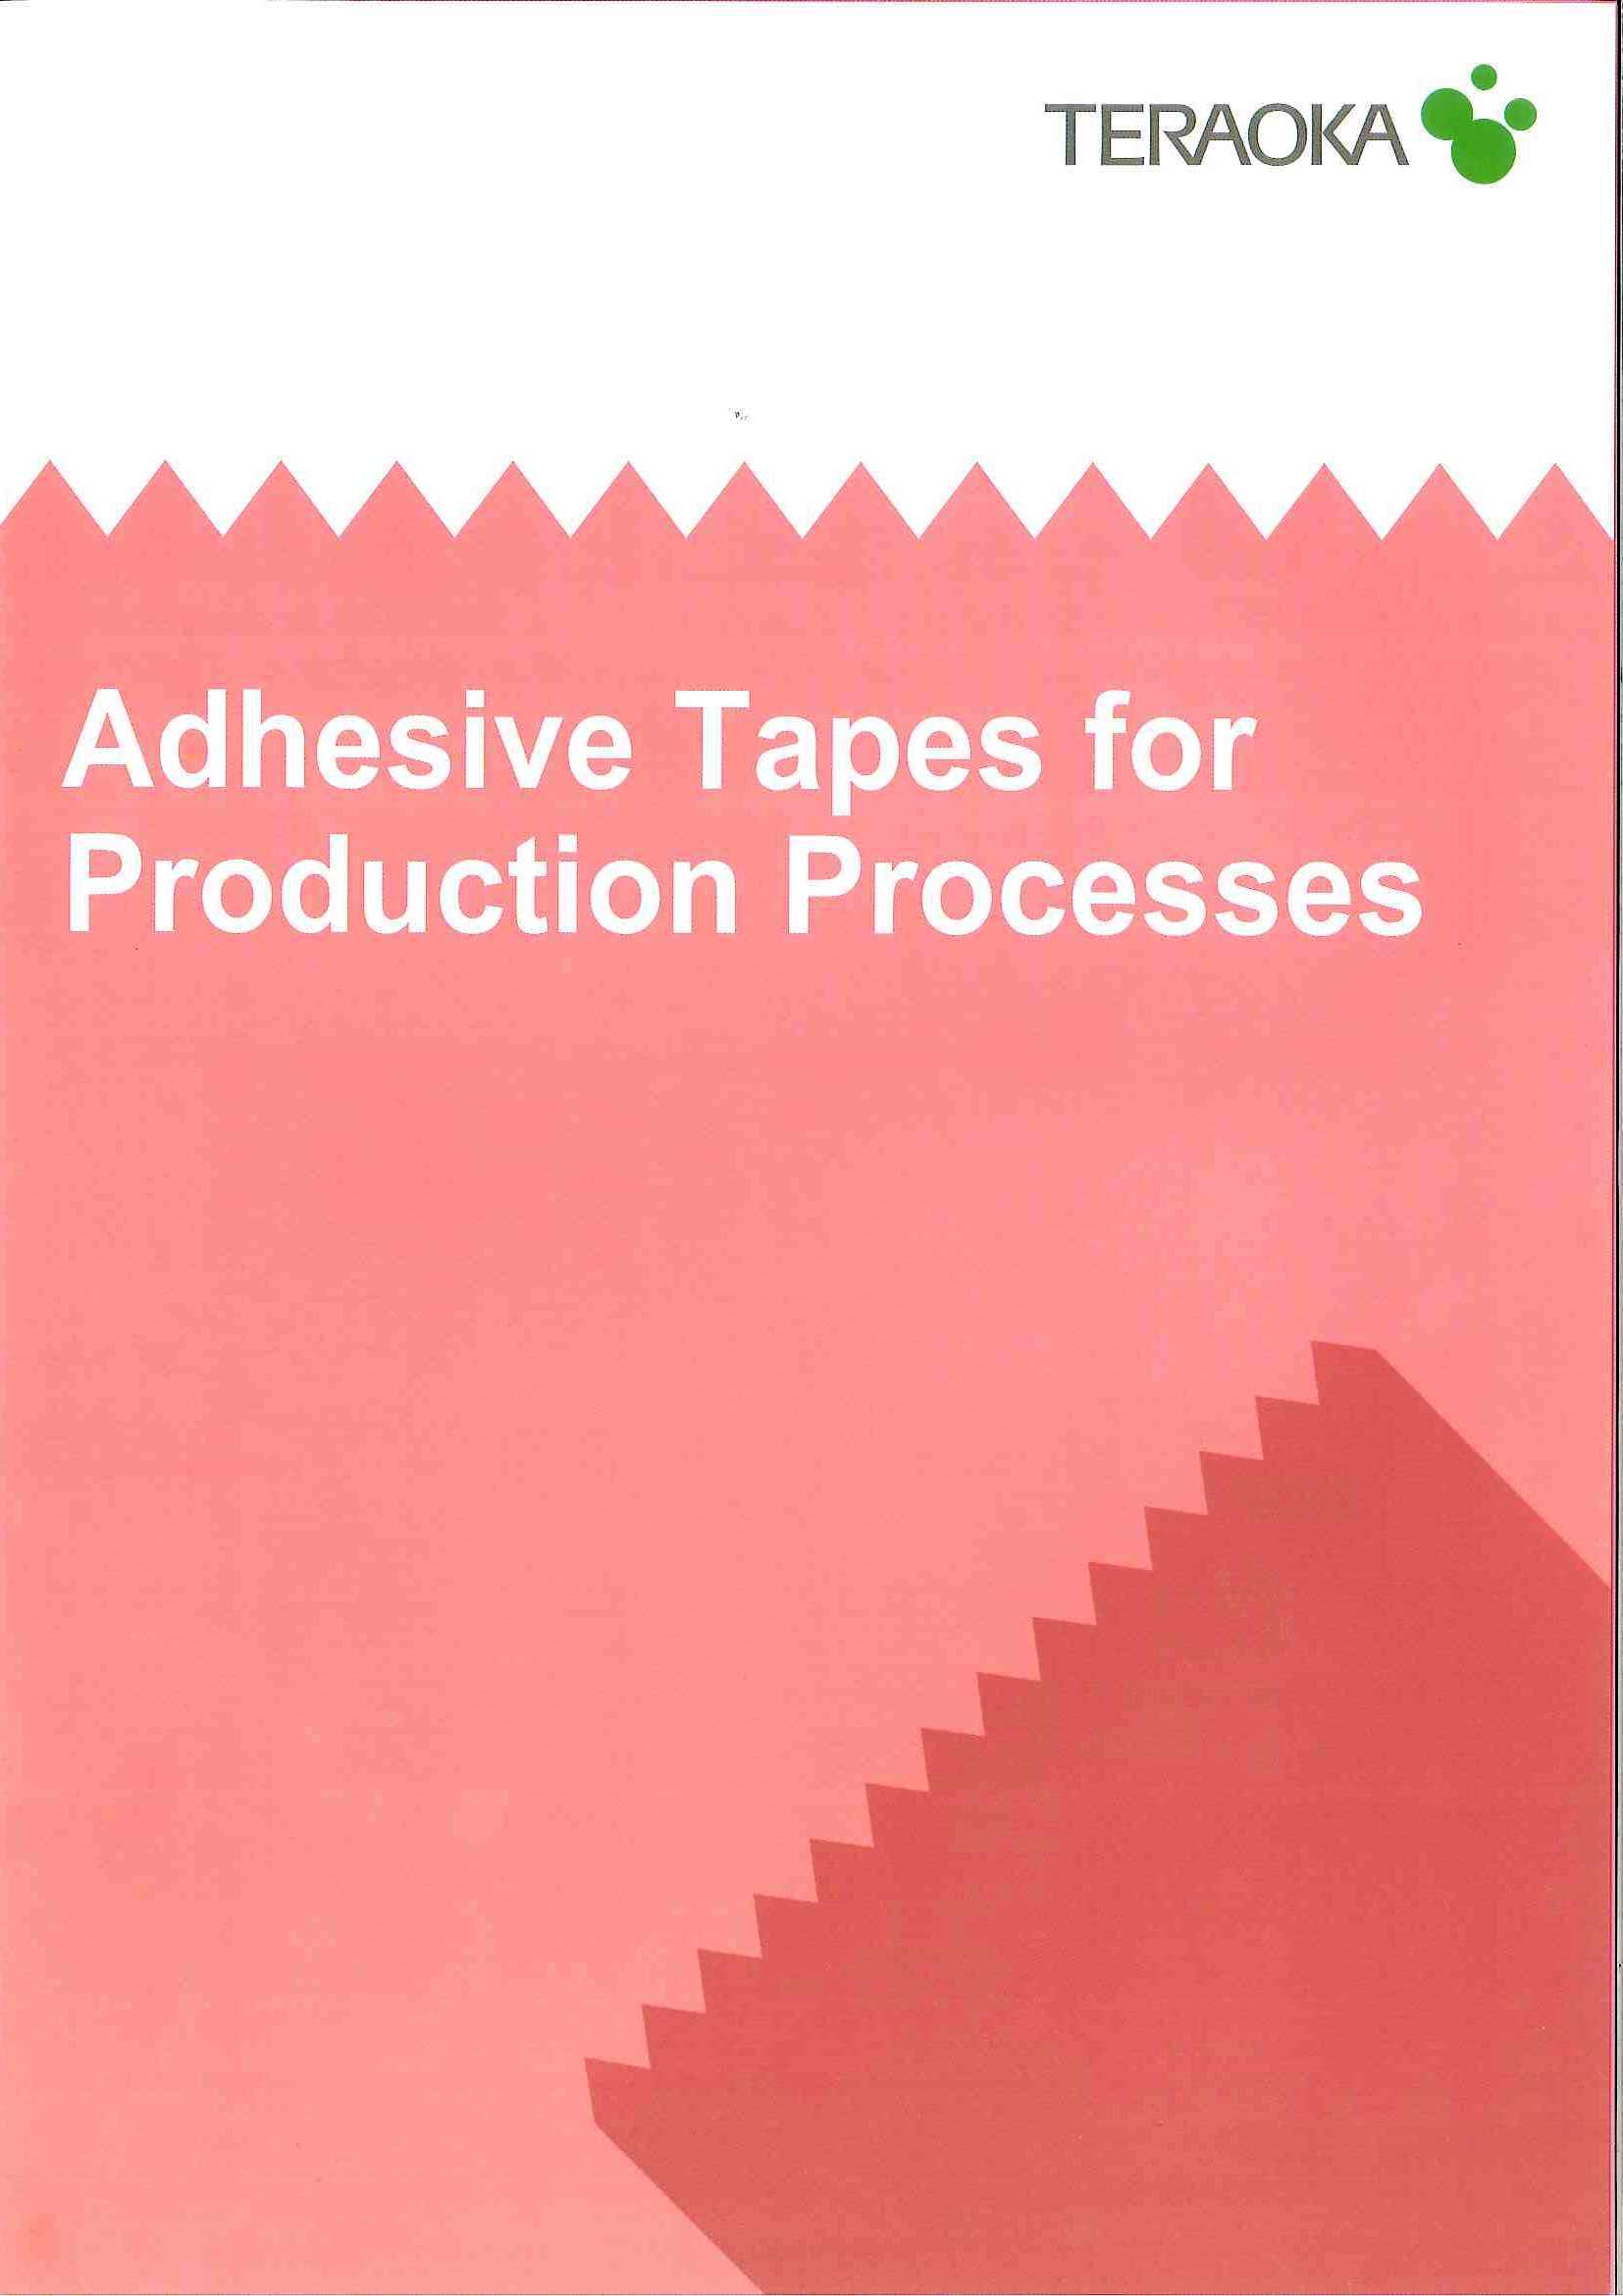 Adhesive Tapes for Production Processes